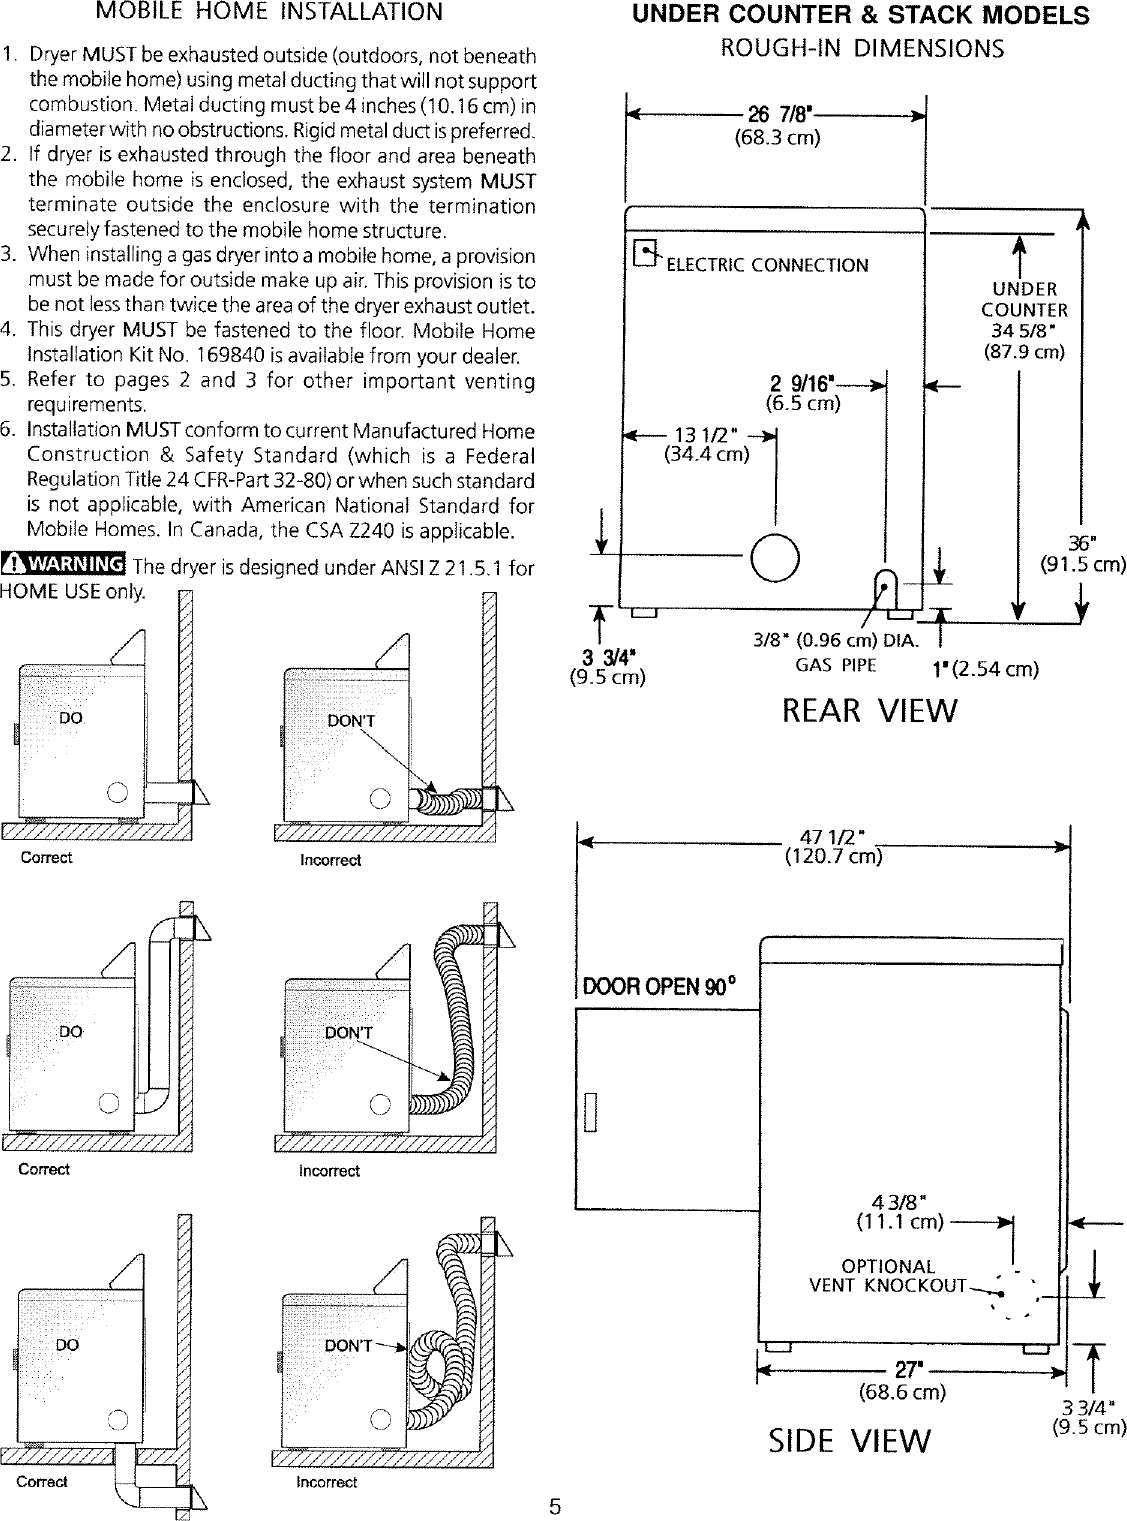 Page 5 of 9 - Frigidaire FER231AS2 User Manual  DRYER - Manuals And Guides L0412310